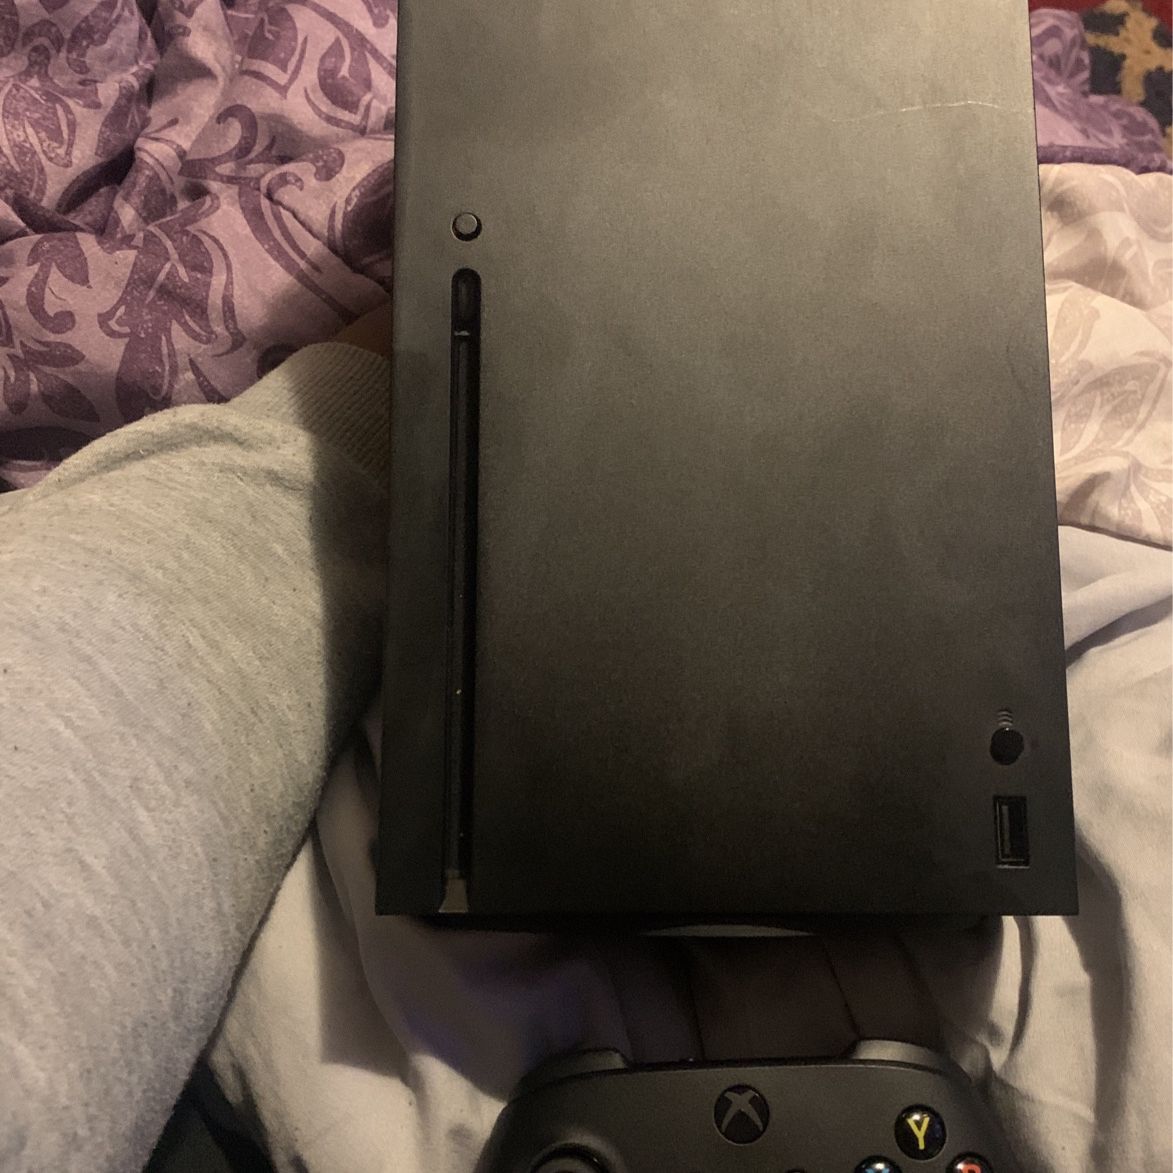 Brand new Xbox Series X/ SERIOUS INQUIRIES ONLY NEED GONE ASAP